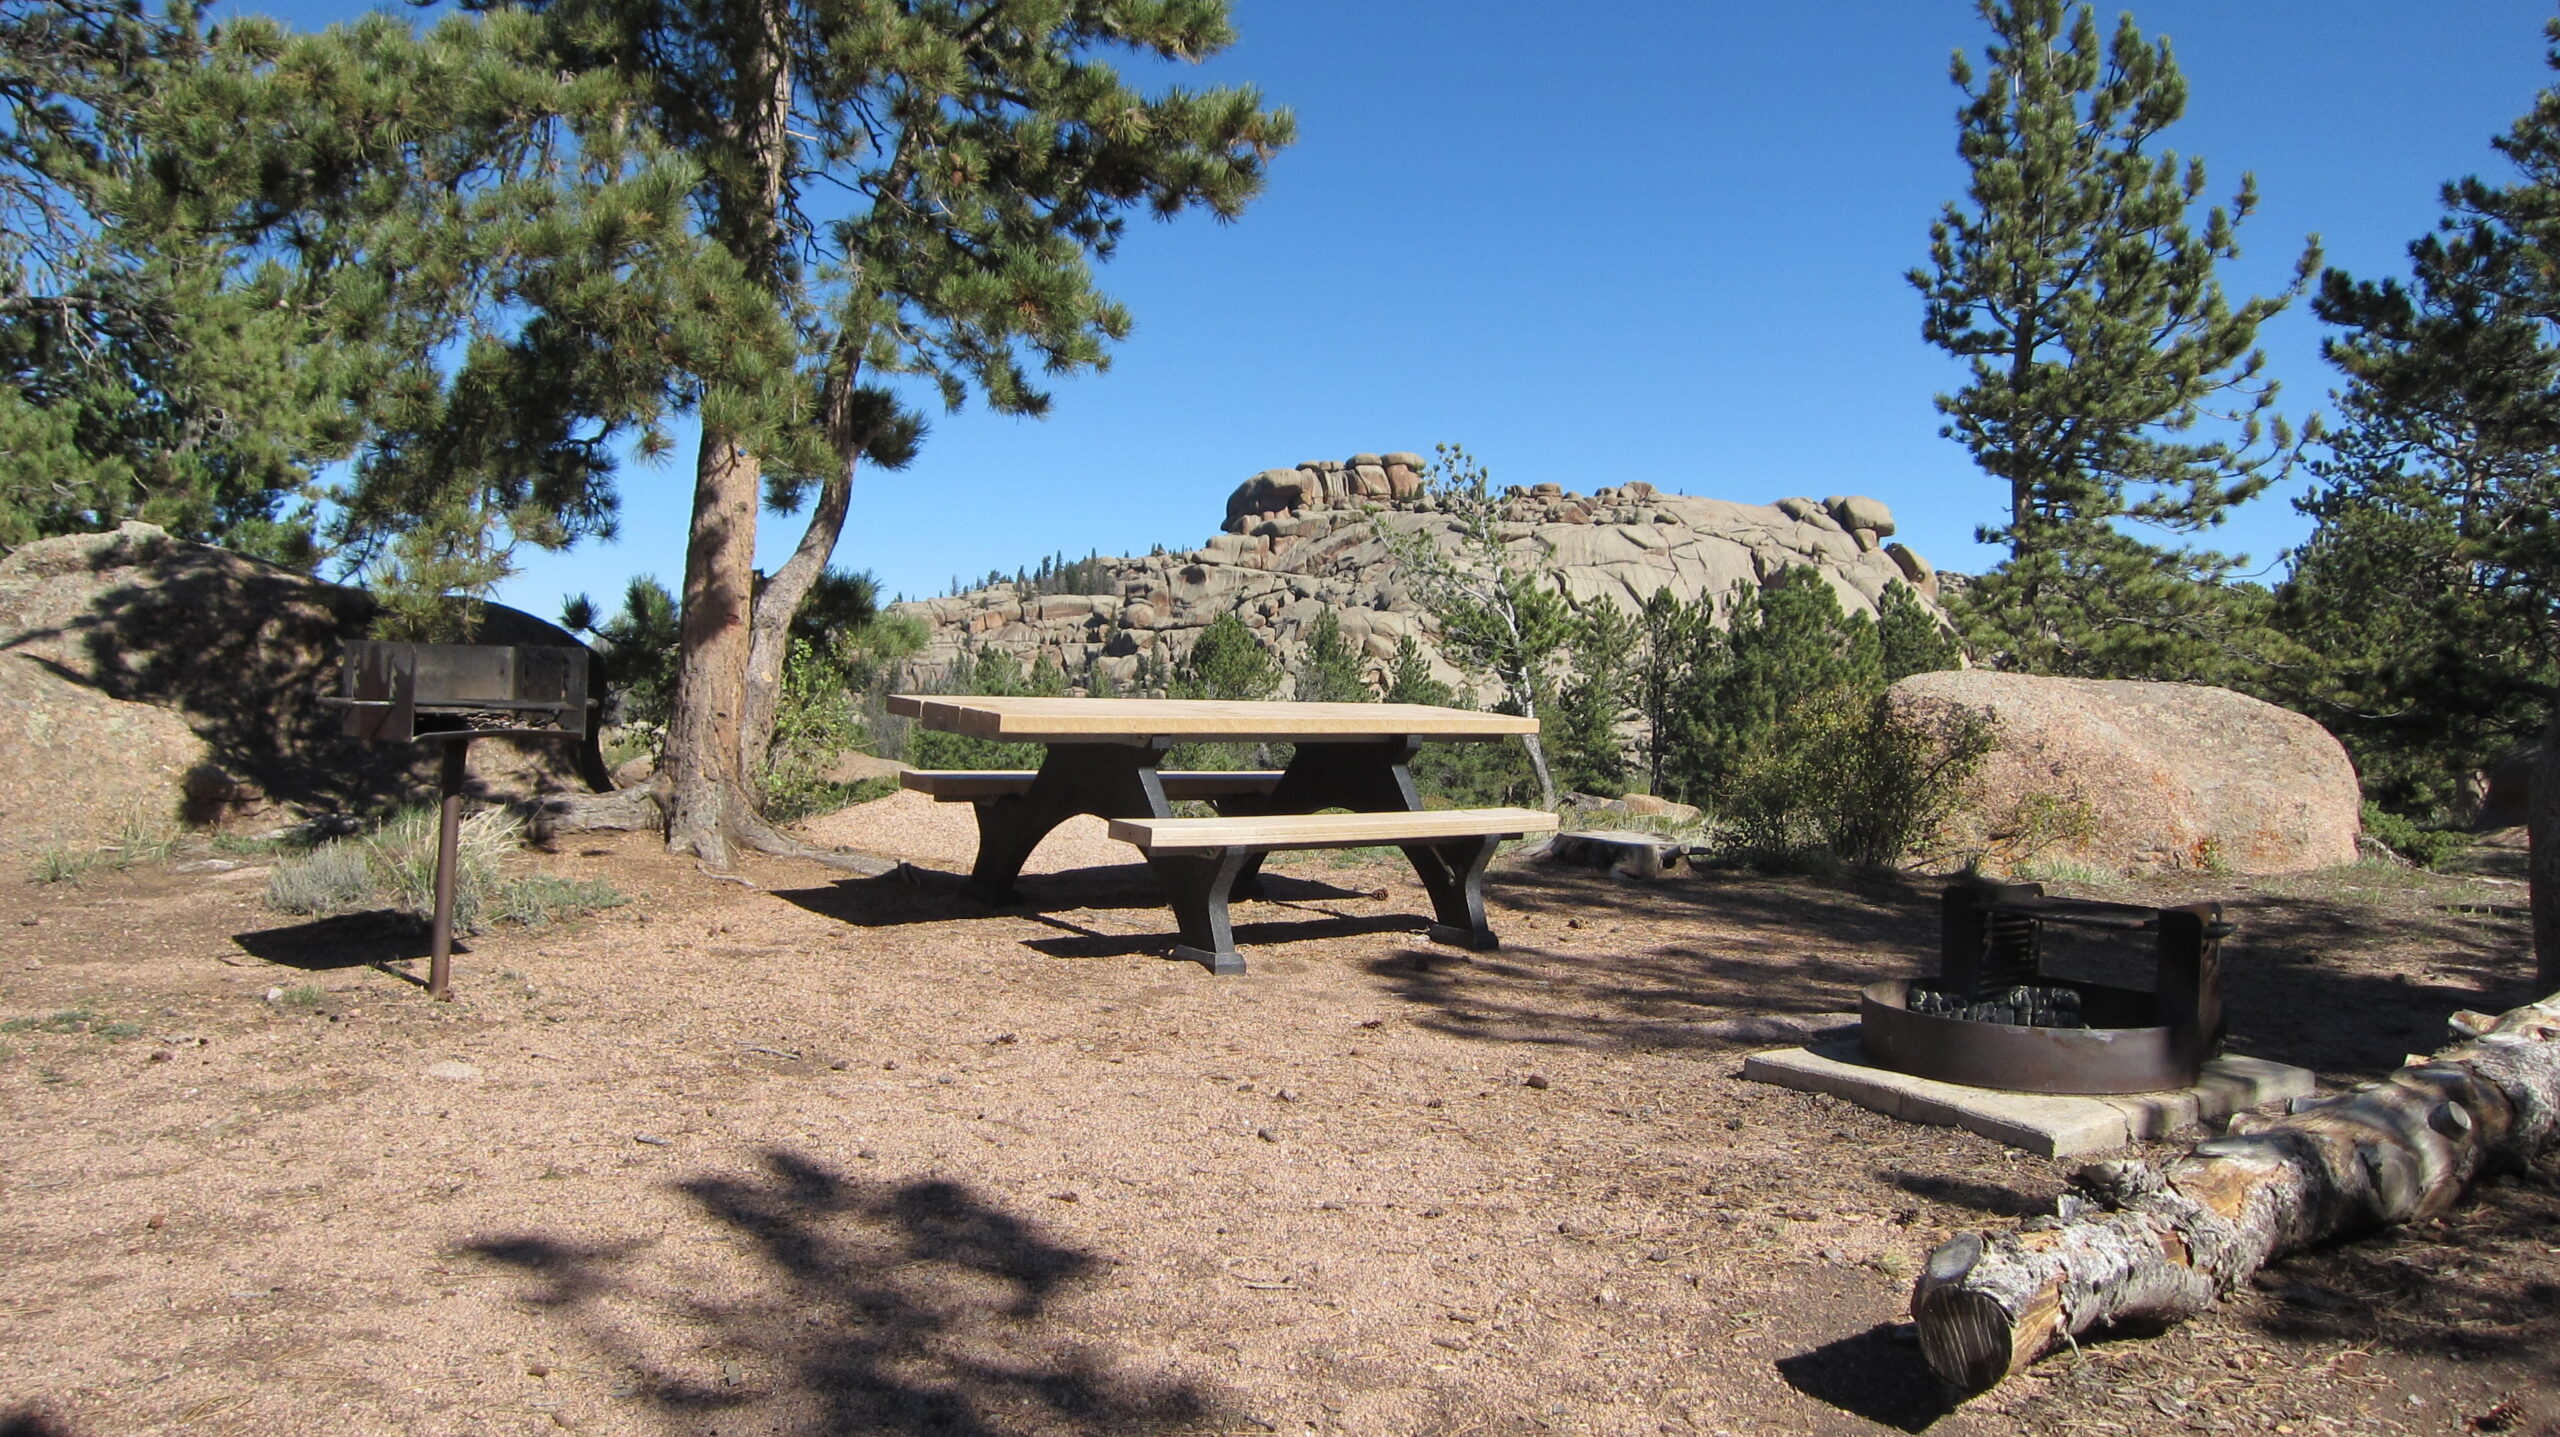 Picnic table at campsite with climbing rocks in background